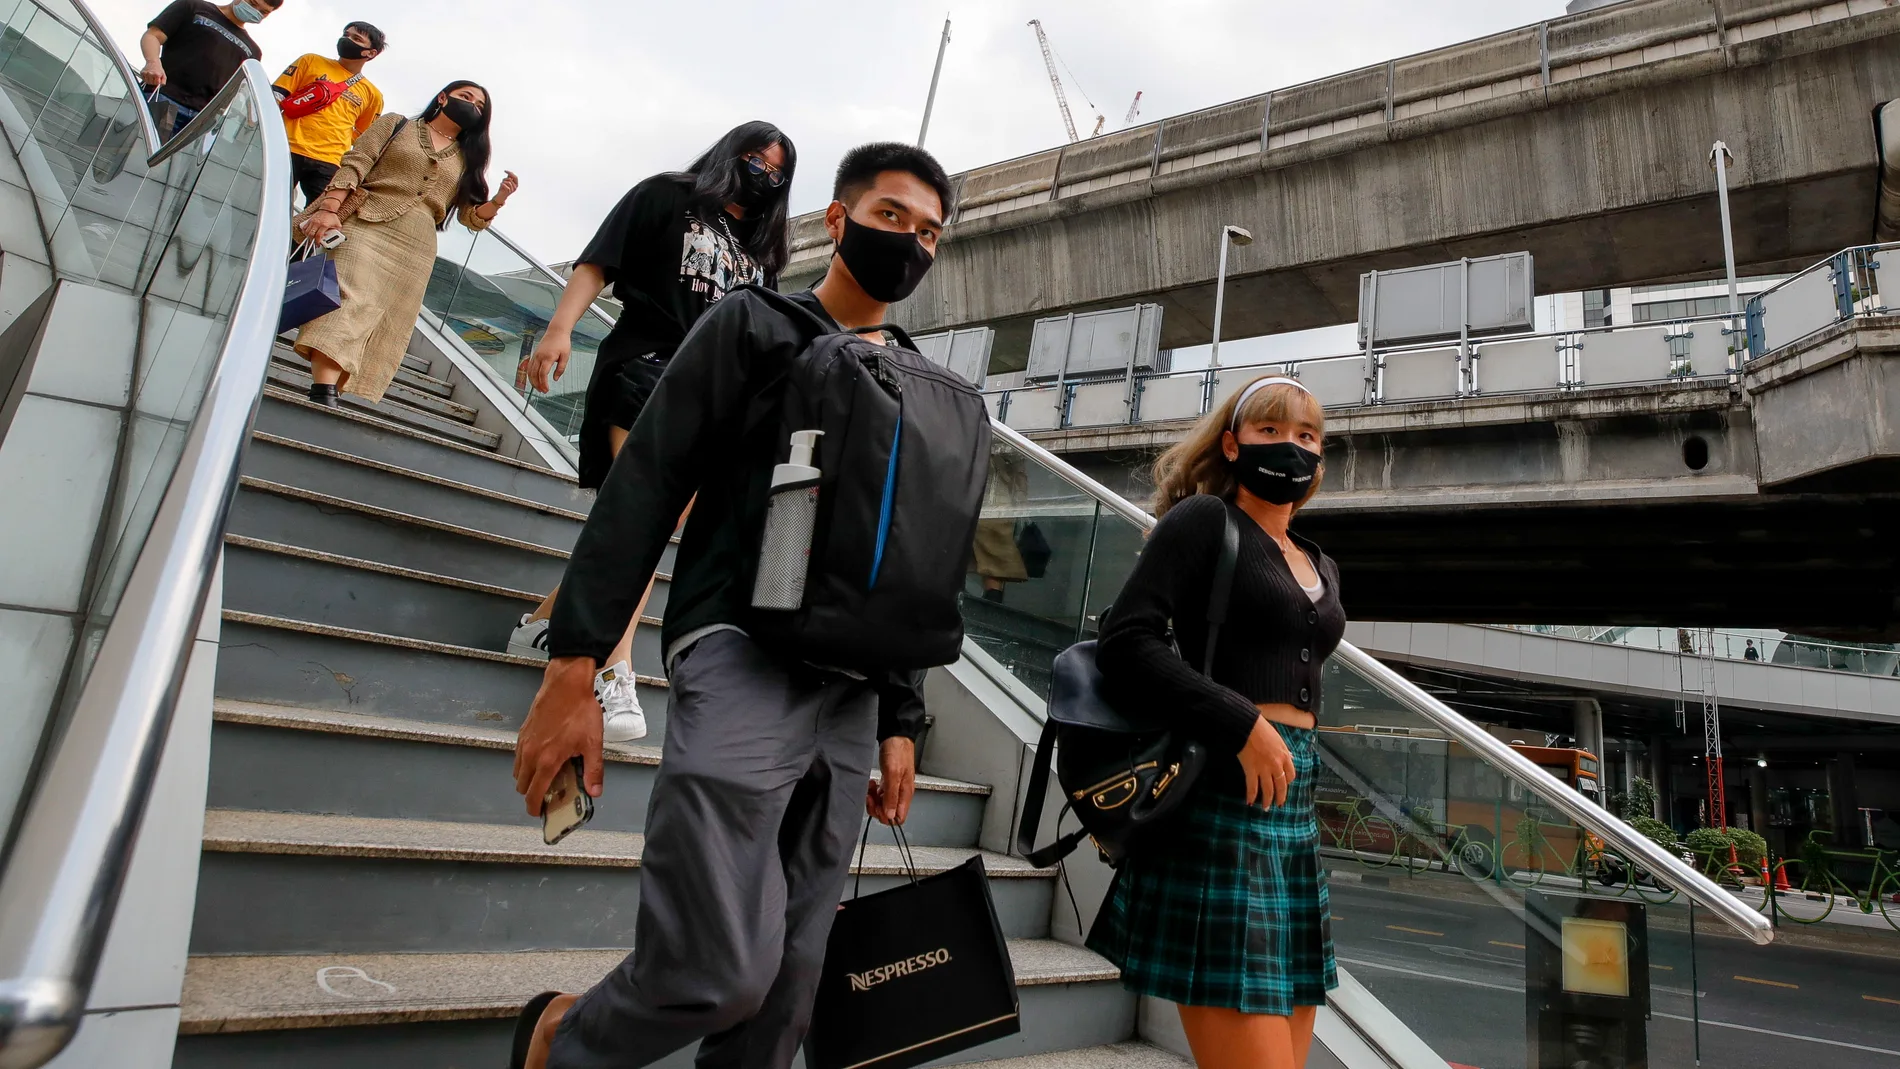 Bangkok (Thailand), 29/12/2020.- People wearing masks walk to an art gallery in Bangkok, Thailand, 29 December 2020. Thailand reported its first COVID-19 related death in almost two months, bringing the total number of fatalities to 61. In order to help contain the spread of the coronavirus disease (COVID-19) pandemic, the government has imposed tighter restrictions on entertainment venus in Bangkok in the lead up to New Year. (Tailandia) EFE/EPA/DIEGO AZUBEL